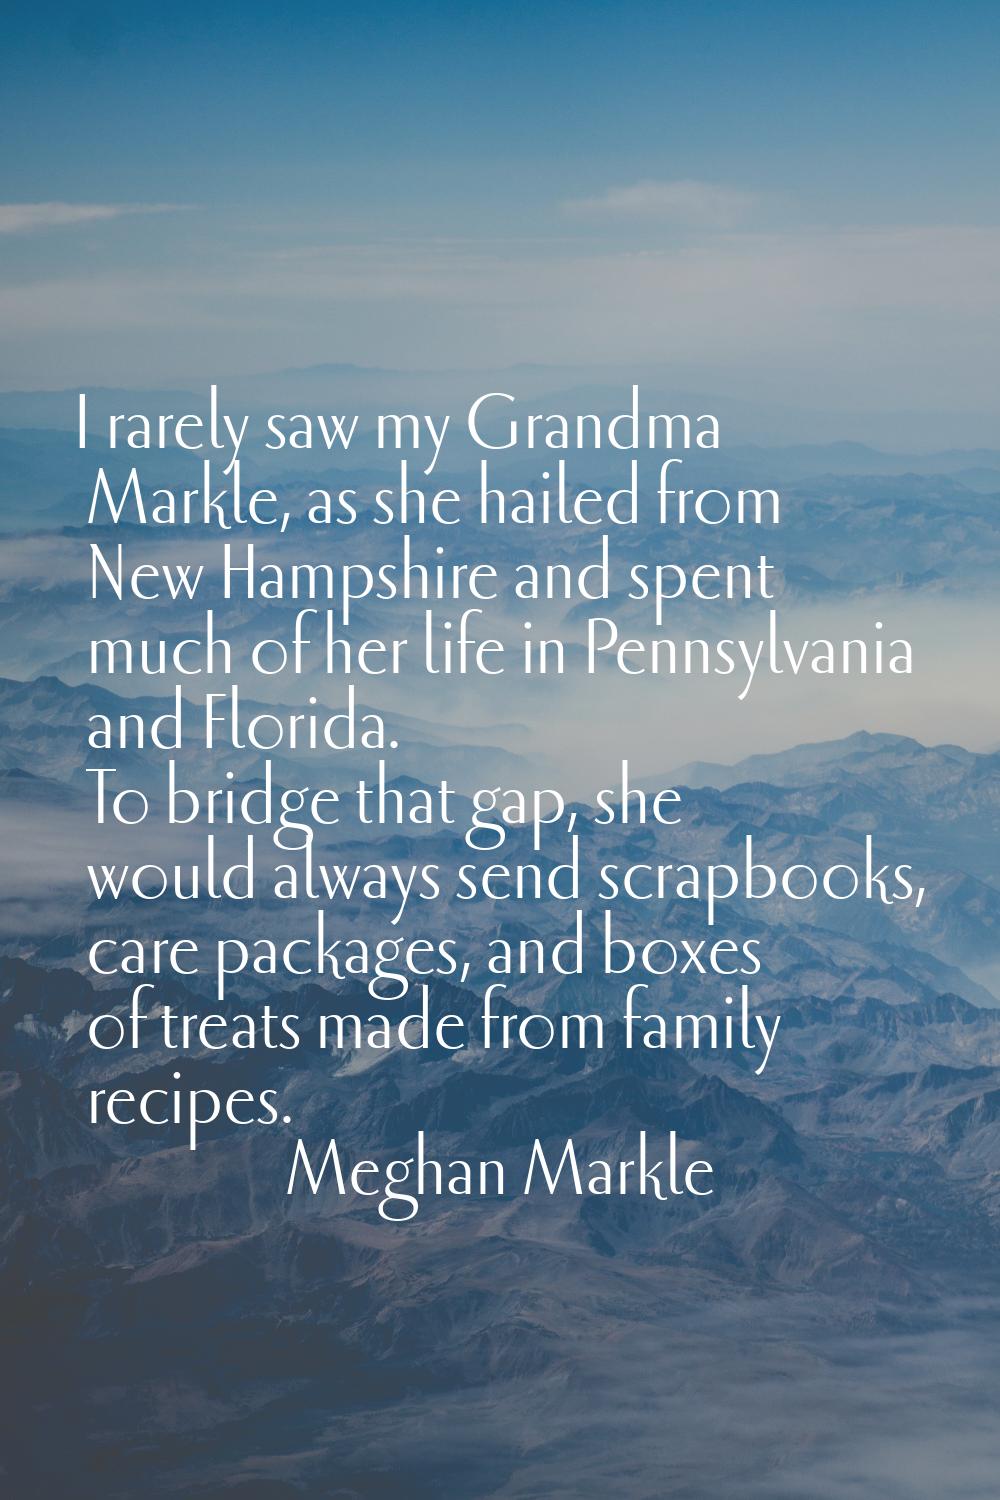 I rarely saw my Grandma Markle, as she hailed from New Hampshire and spent much of her life in Penn